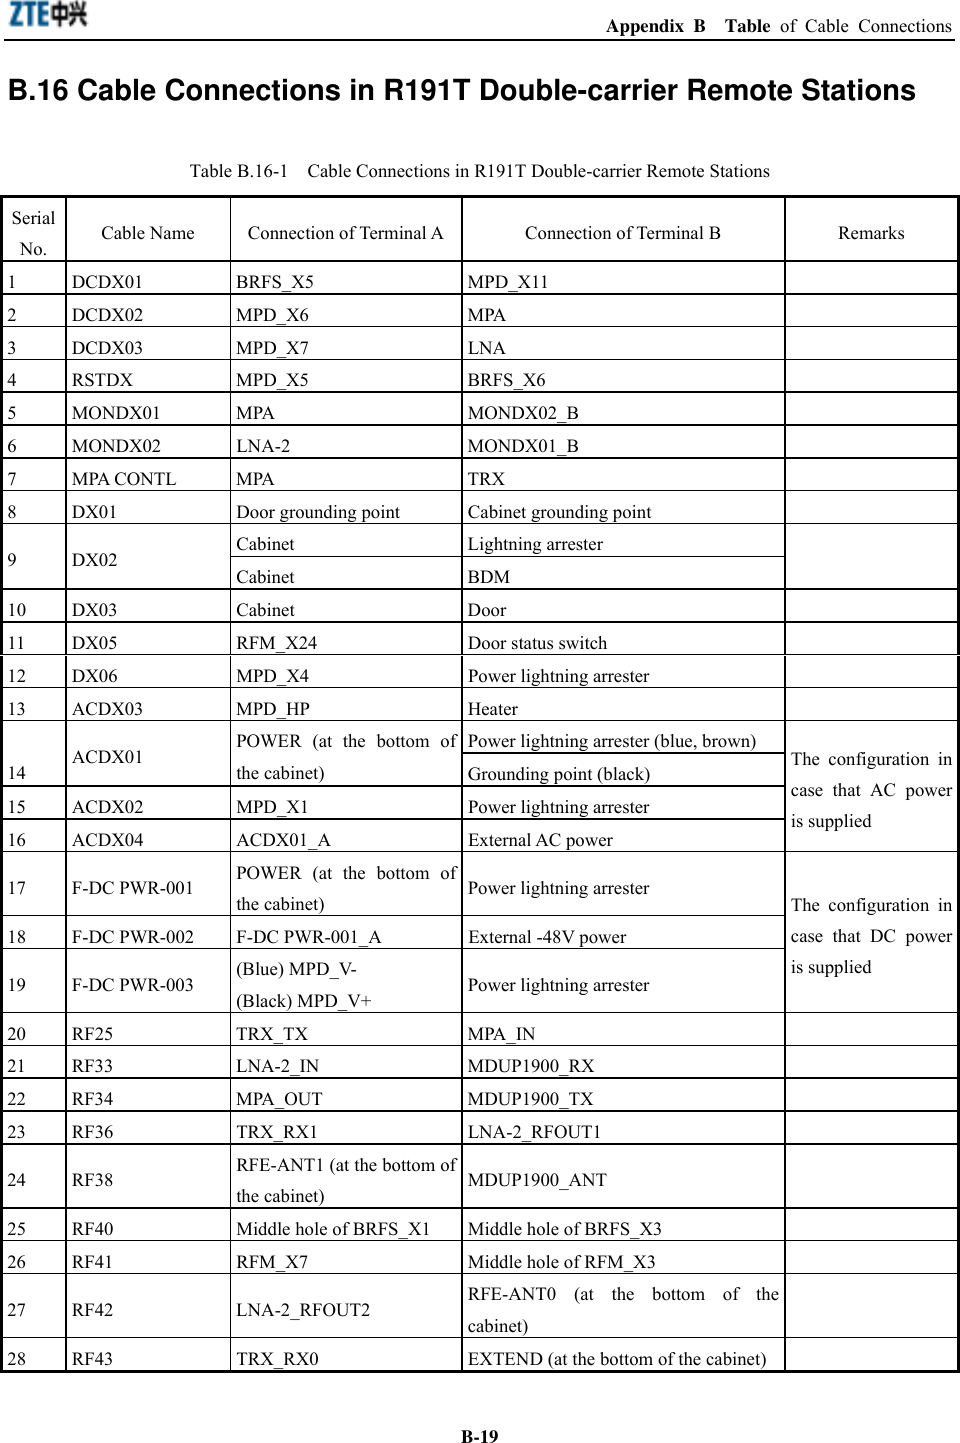  Appendix B  Table of Cable Connections  B-19B.16 Cable Connections in R191T Double-carrier Remote Stations Table B.16-1    Cable Connections in R191T Double-carrier Remote Stations Serial No.  Cable Name  Connection of Terminal A Connection of Terminal B  Remarks 1 DCDX01  BRFS_X5  MPD_X11   2 DCDX02  MPD_X6  MPA   3 DCDX03  MPD_X7  LNA   4 RSTDX  MPD_X5  BRFS_X6   5 MONDX01  MPA  MONDX02_B   6 MONDX02  LNA-2  MONDX01_B   7 MPA CONTL  MPA  TRX   8  DX01  Door grounding point  Cabinet grounding point   Cabinet Lightning arrester  9 DX02 Cabinet BDM  10 DX03  Cabinet  Door   11  DX05  RFM_X24  Door status switch   12  DX06  MPD_X4  Power lightning arrester   13 ACDX03  MPD_HP  Heater   Power lightning arrester (blue, brown)  14  ACDX01  POWER (at the bottom of the cabinet)  Grounding point (black) 15  ACDX02  MPD_X1  Power lightning arrester 16 ACDX04  ACDX01_A  External AC power The configuration in case that AC power is supplied 17 F-DC PWR-001 POWER (at the bottom of the cabinet)  Power lightning arrester 18  F-DC PWR-002  F-DC PWR-001_A  External -48V power 19 F-DC PWR-003 (Blue) MPD_V- (Black) MPD_V+  Power lightning arrester The configuration in case that DC power is supplied 20 RF25  TRX_TX  MPA_IN   21 RF33  LNA-2_IN  MDUP1900_RX   22 RF34  MPA_OUT  MDUP1900_TX   23 RF36  TRX_RX1  LNA-2_RFOUT1   24 RF38  RFE-ANT1 (at the bottom of the cabinet)  MDUP1900_ANT  25  RF40  Middle hole of BRFS_X1  Middle hole of BRFS_X3   26  RF41  RFM_X7  Middle hole of RFM_X3   27 RF42  LNA-2_RFOUT2  RFE-ANT0 (at the bottom of the cabinet)   28  RF43  TRX_RX0  EXTEND (at the bottom of the cabinet)   